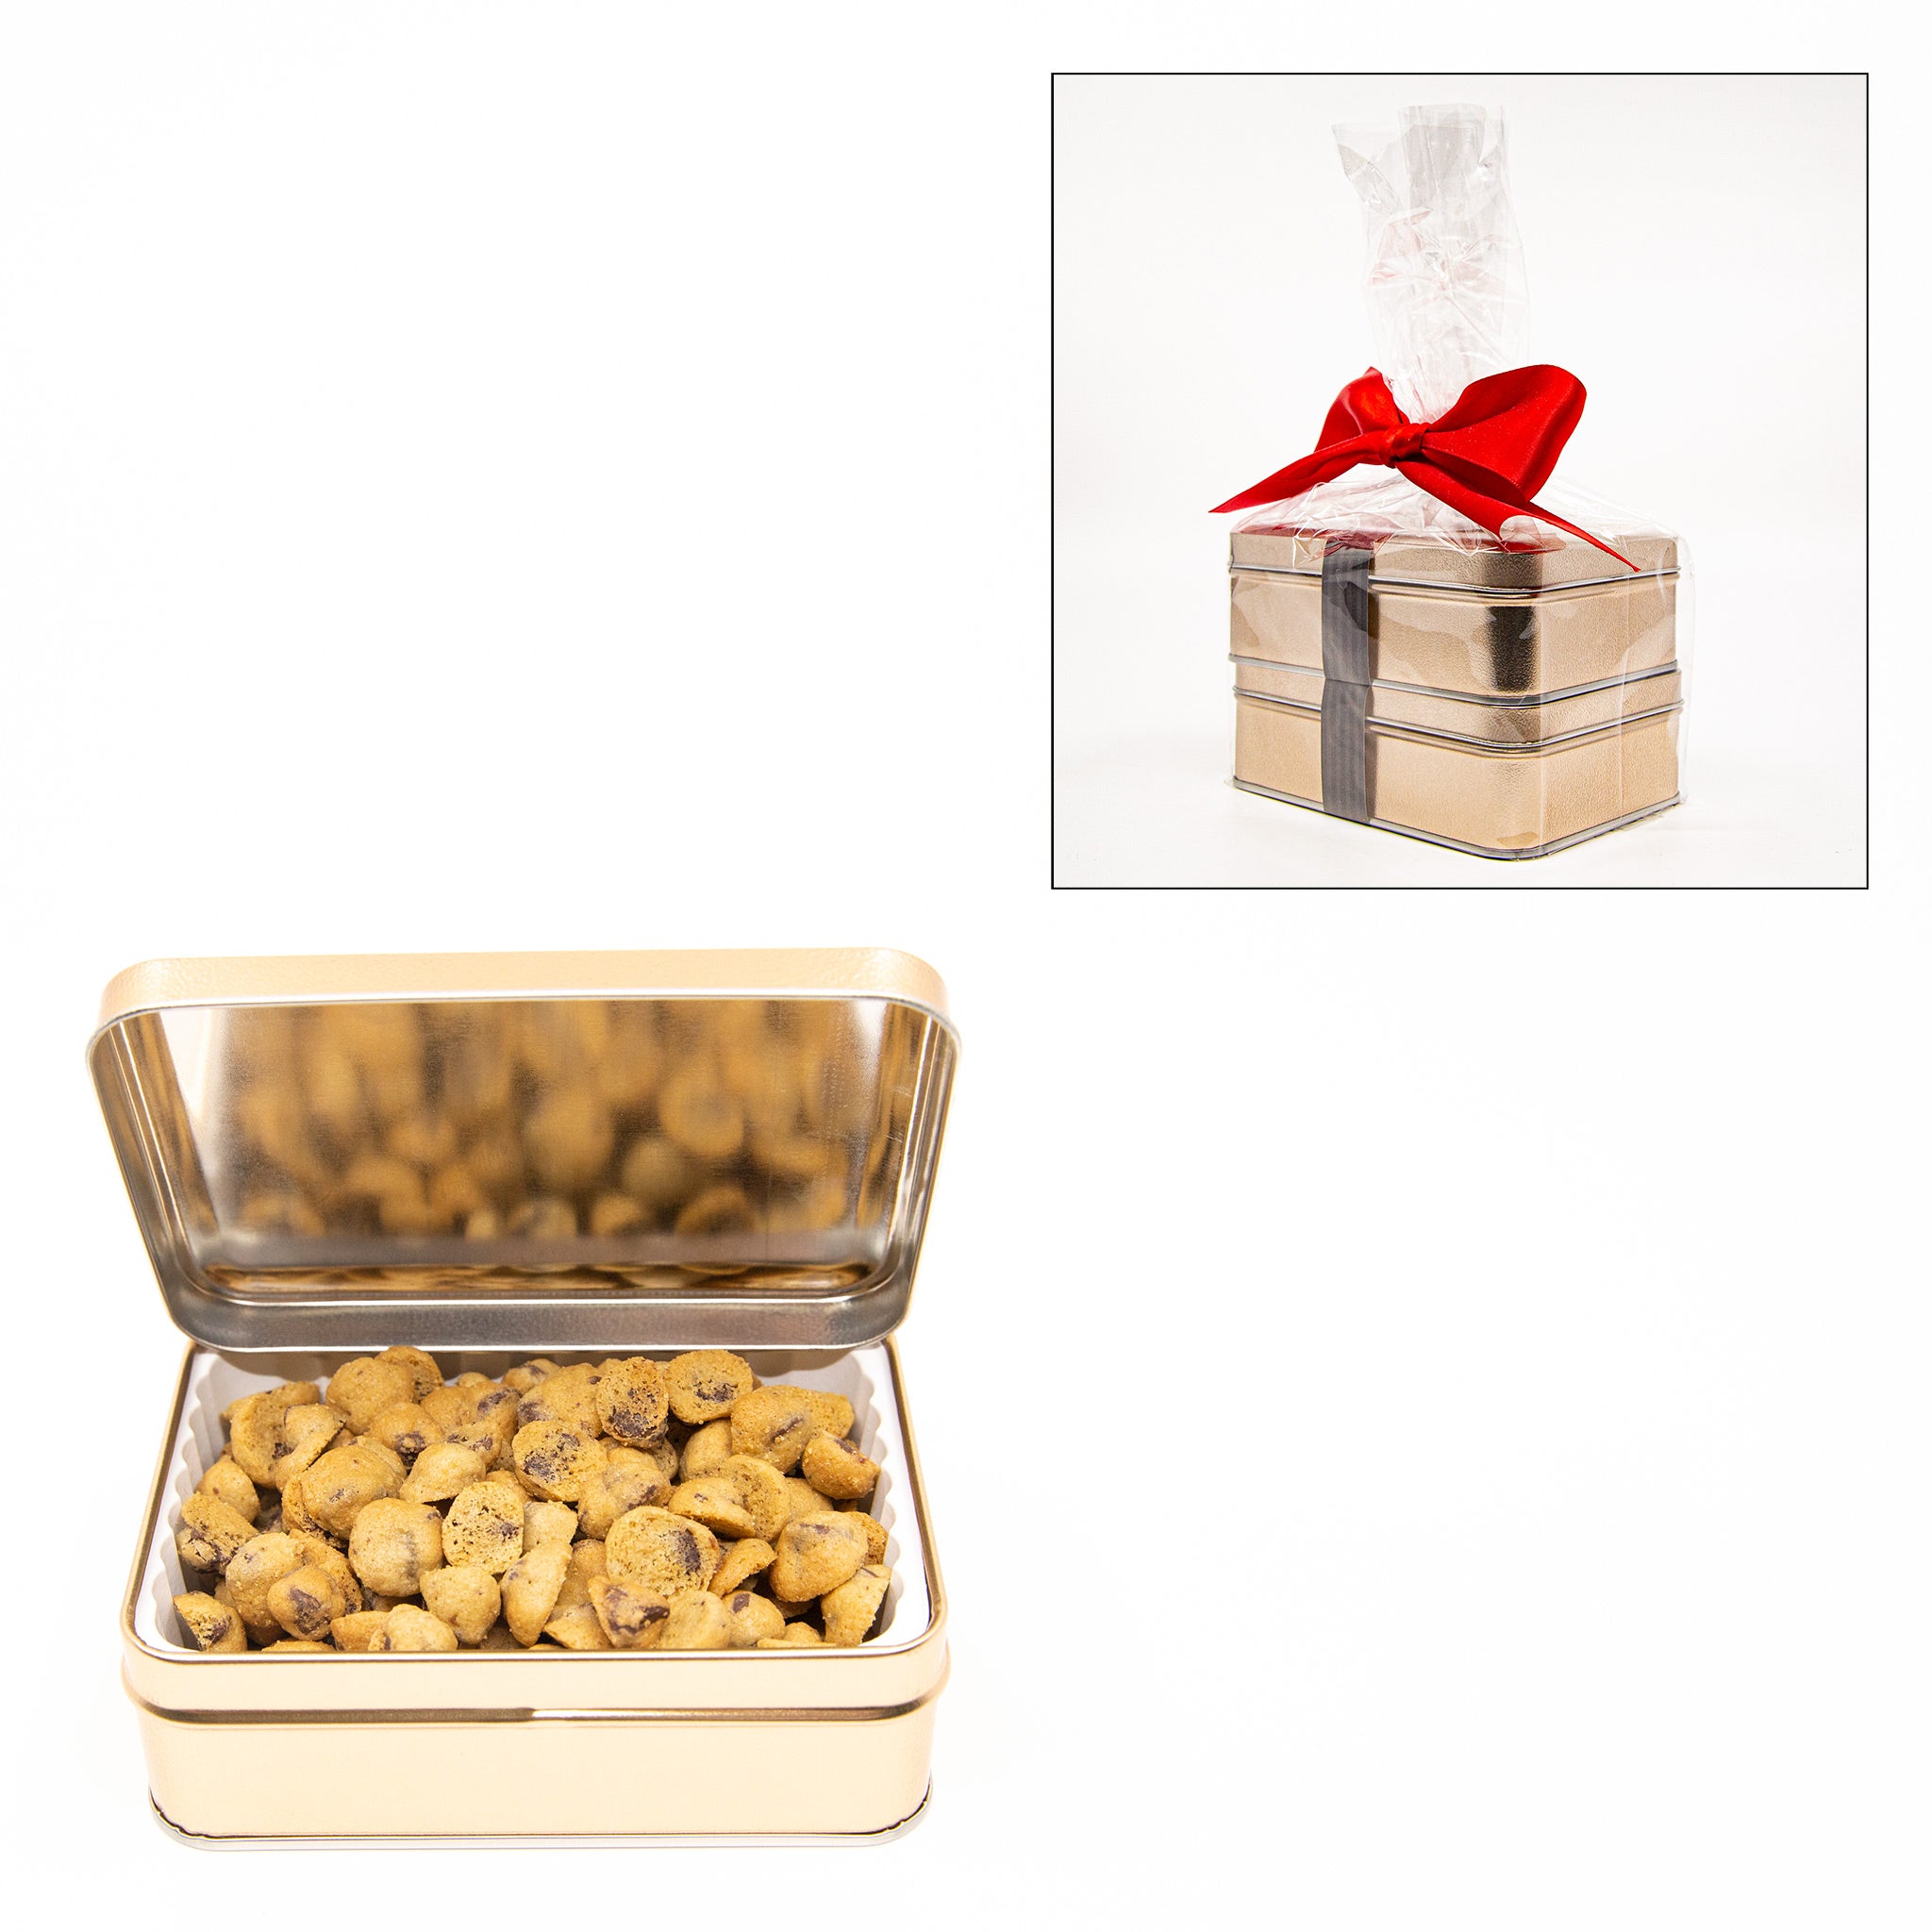 Send Gifts to Europe | Online gift shop offers gift baskets delivery service